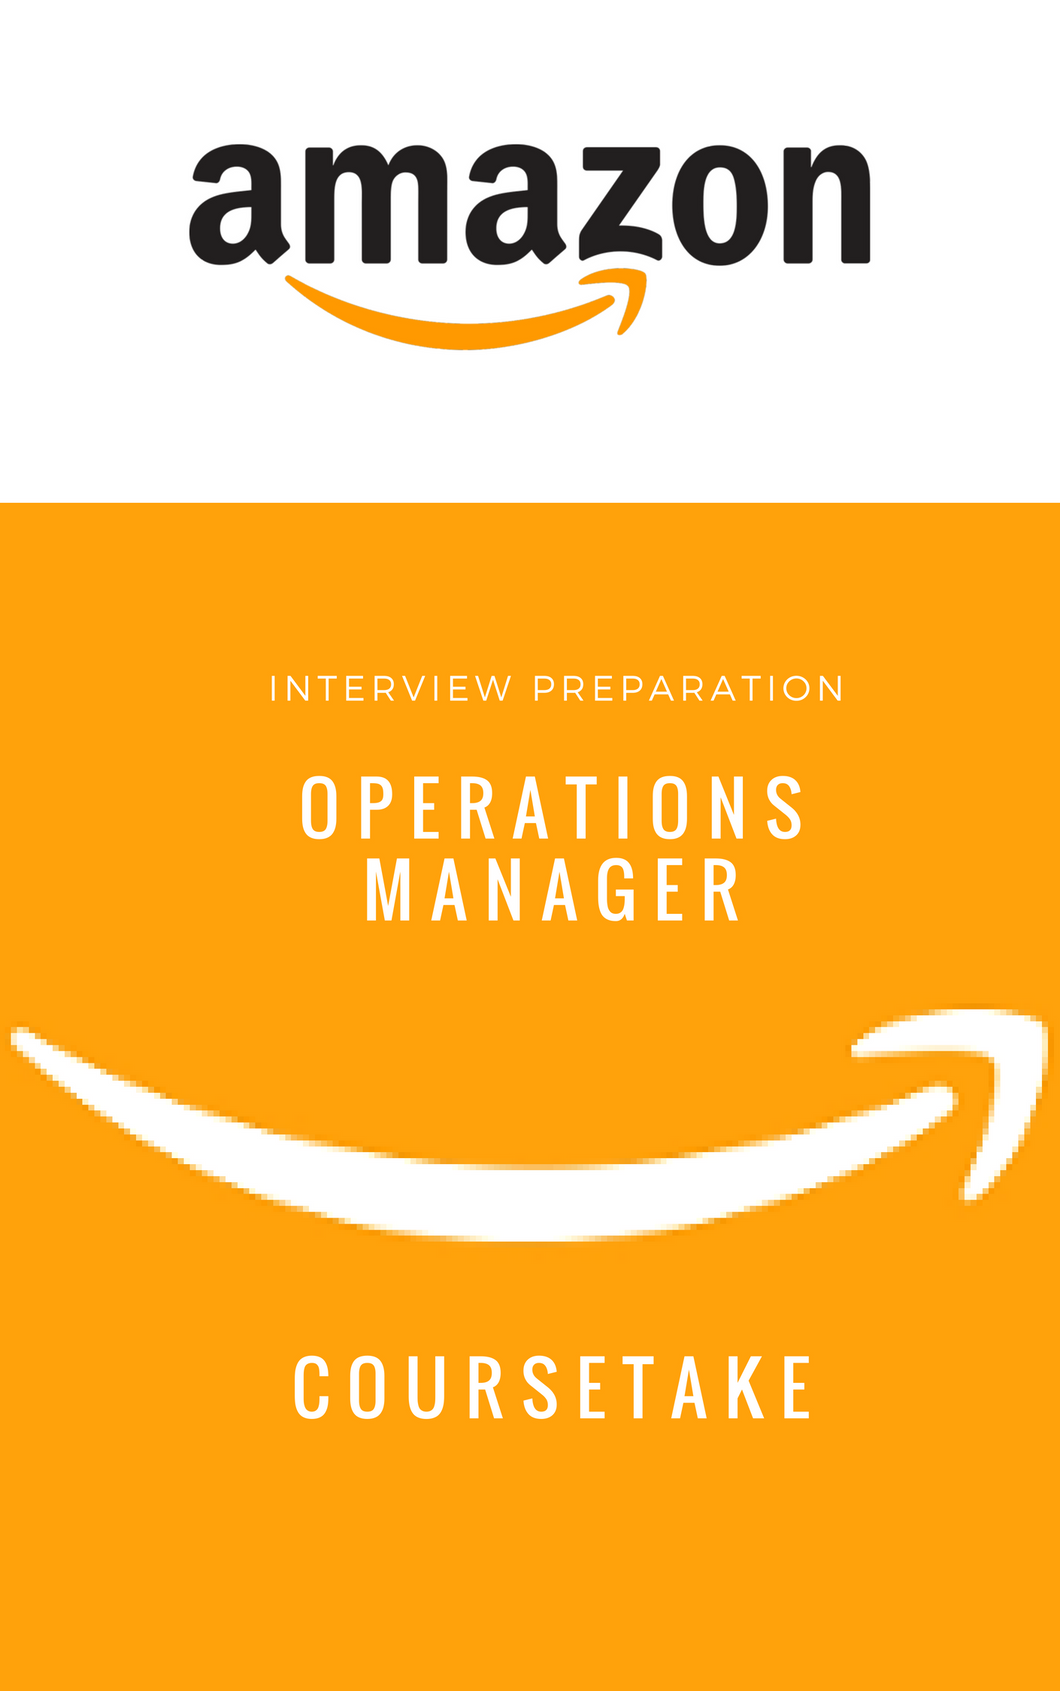 Amazon Operations Manager Interview Preparation Study Guide